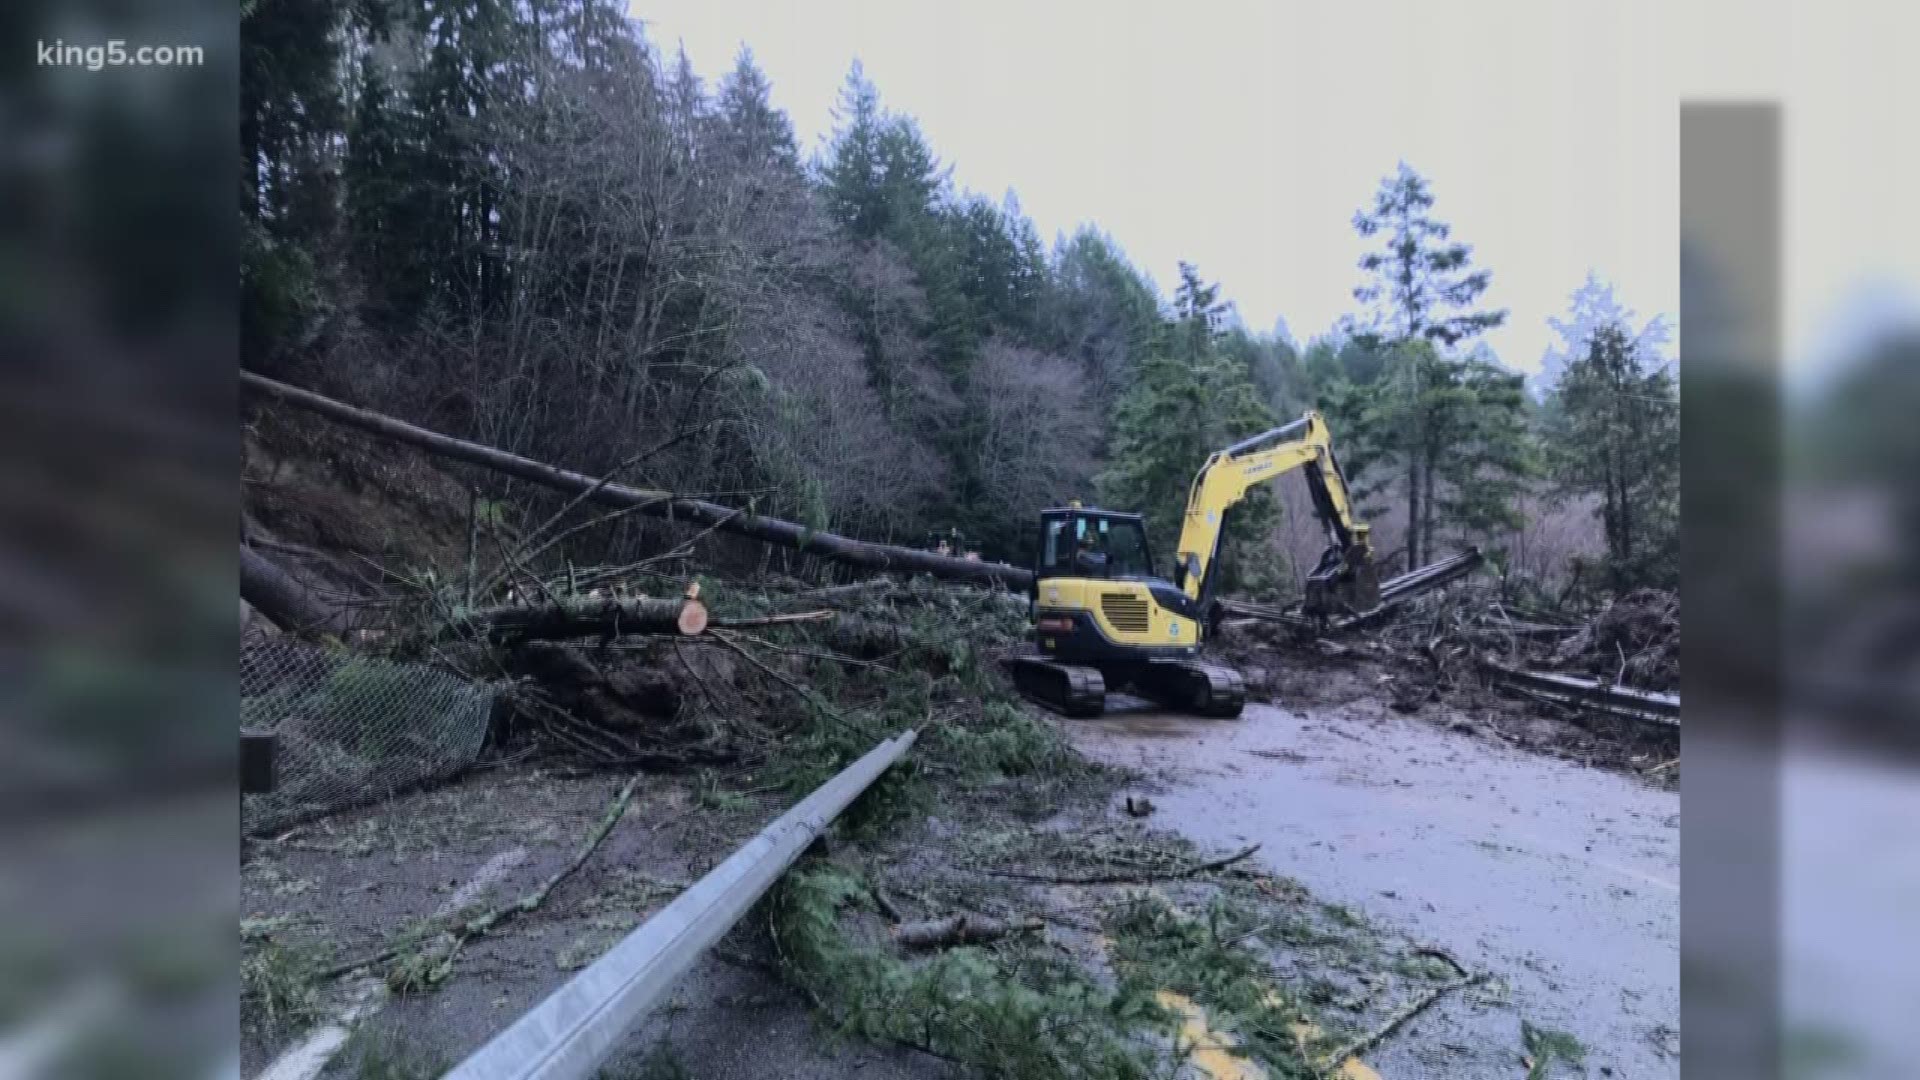 Crews with the Washington Department of Transportation are working to clear debris from SR 410 as quickly as possible after multiple landslides.